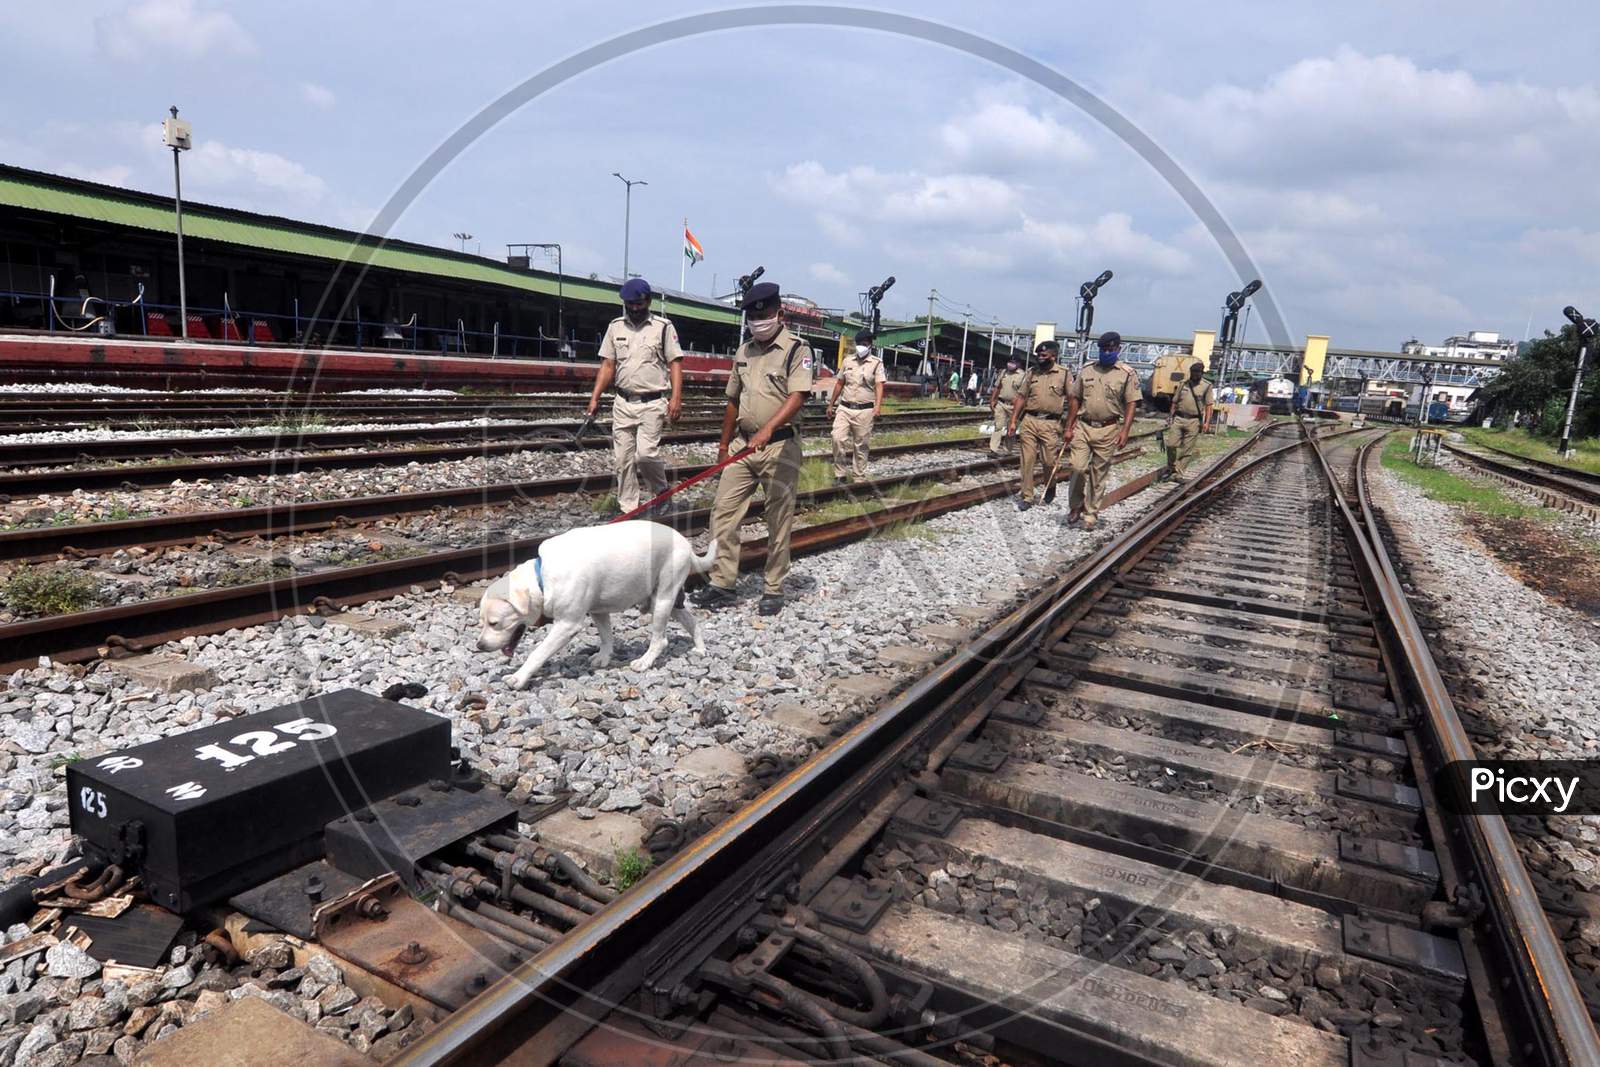 Railway Police Force (Rpf) Personnel Inspect The Tracks And Platform Along With A Sniffer Dog, Ahead Of The Independence Day Celebrations, In Guwahati On Monday, Aug 10, 2020